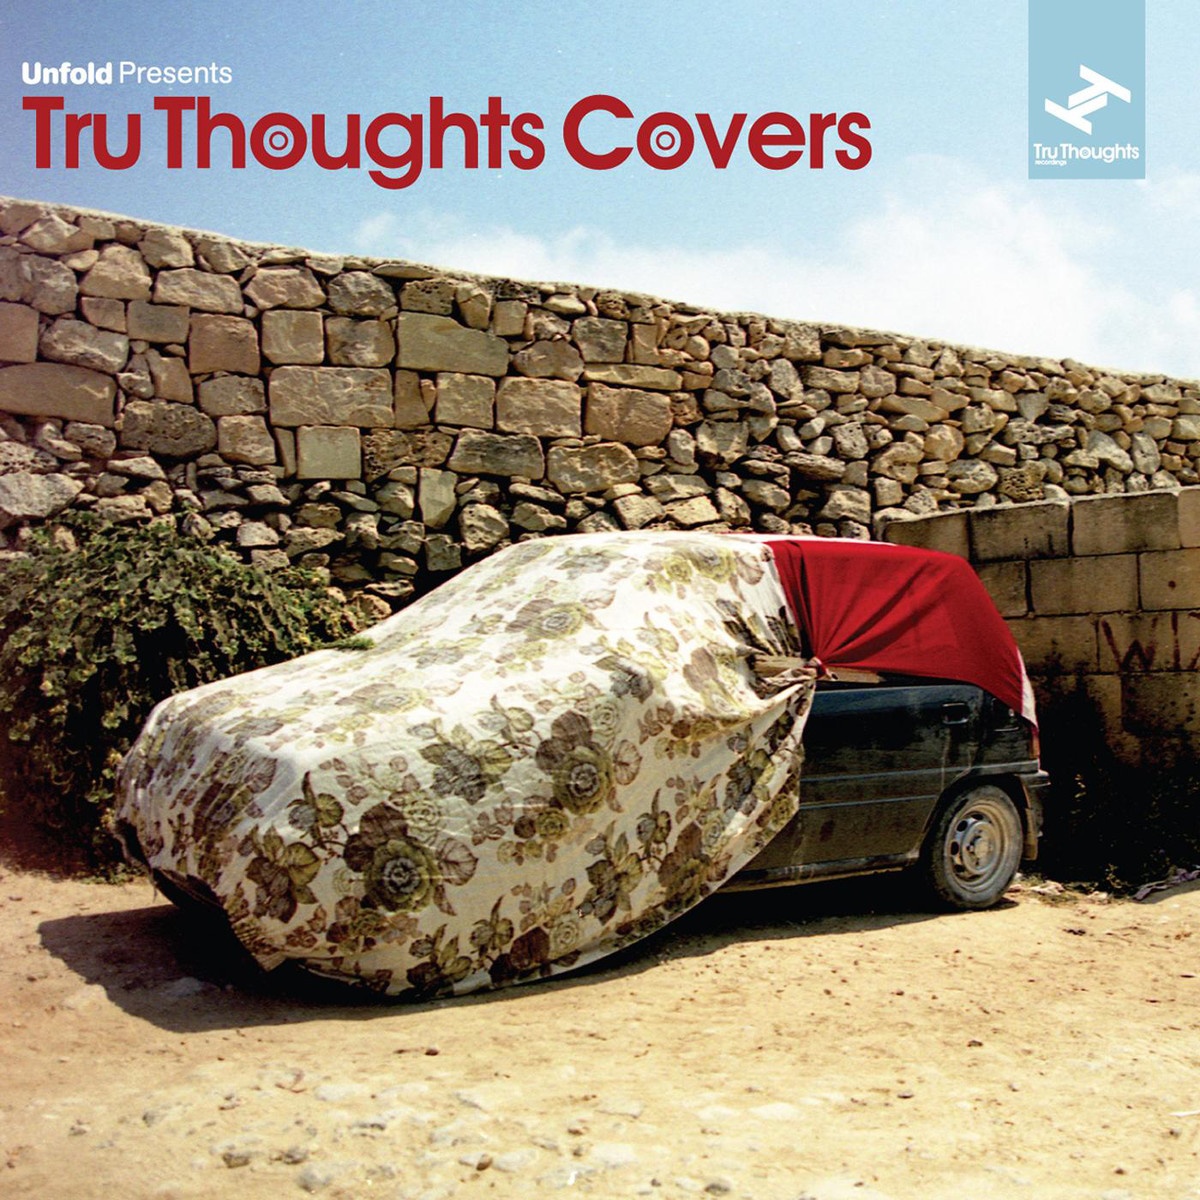 Unfold Presents: Tru Thoughts Covers